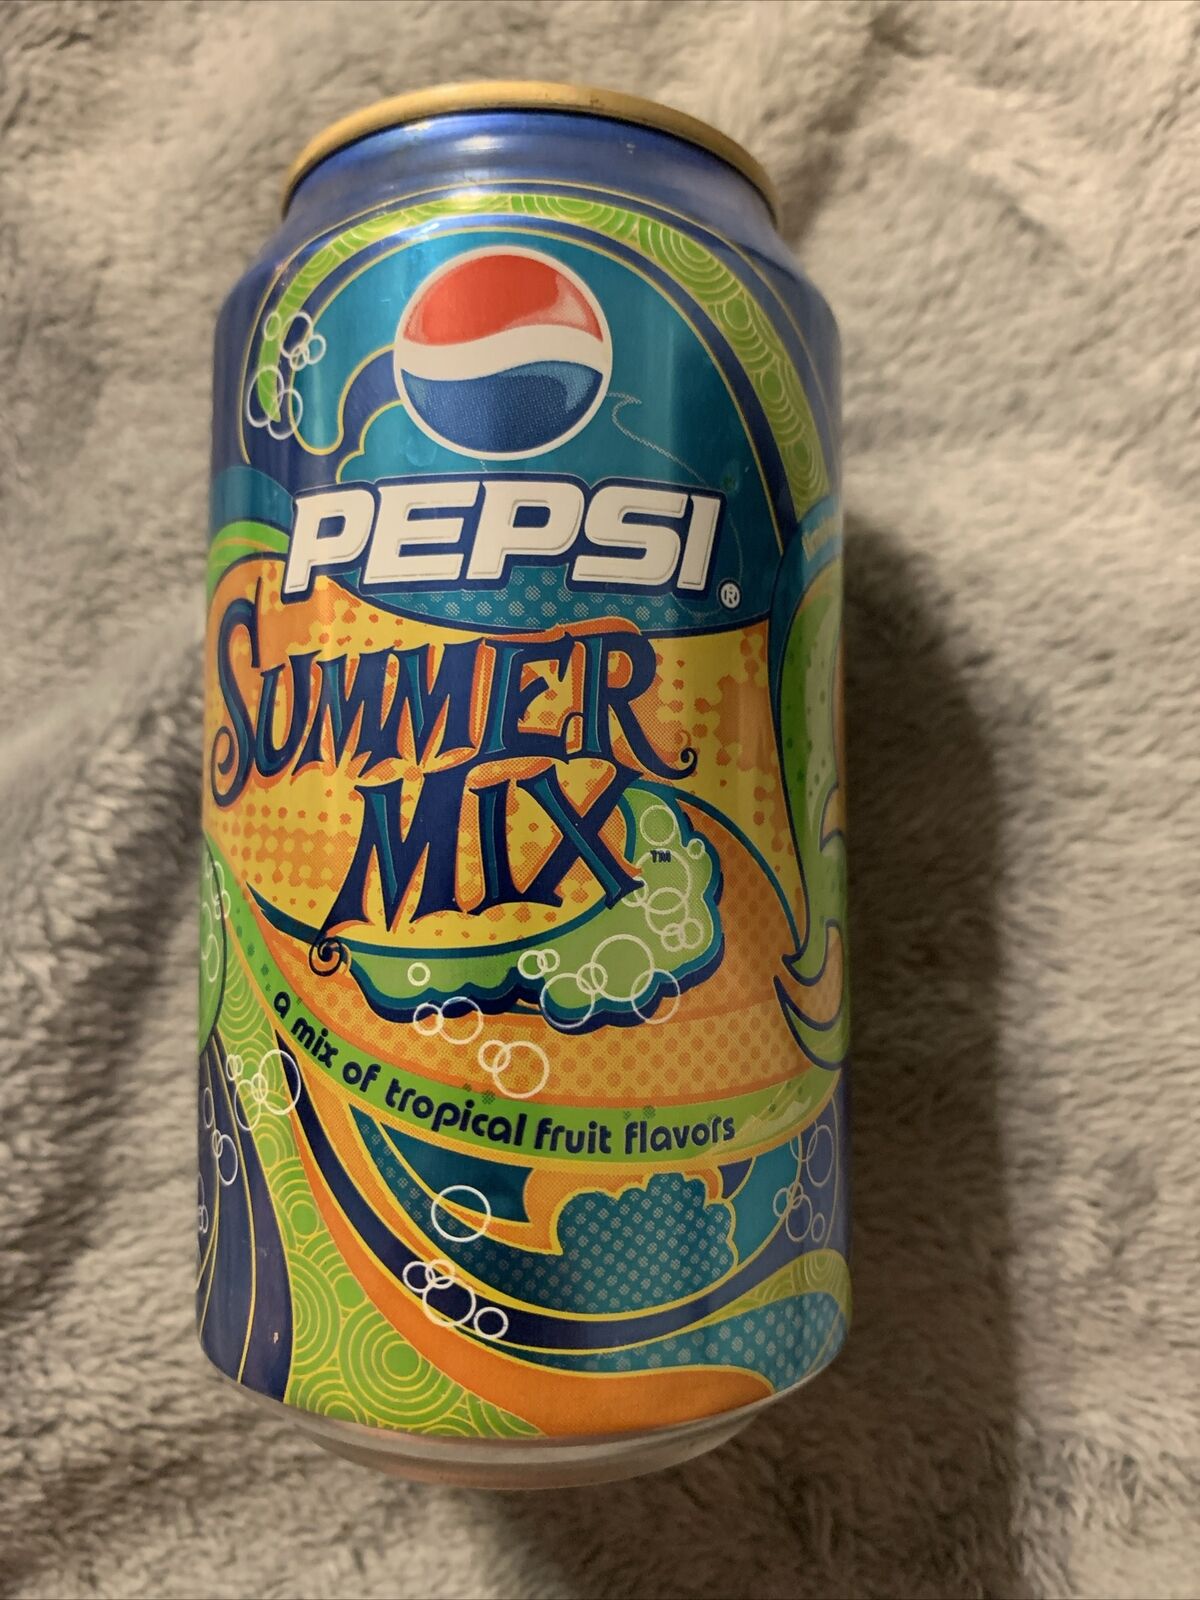 Pepsi Summer Mix Tropical Fruit Soda Can Cool Graphics Aug 13, ‘07 Date Code 👀